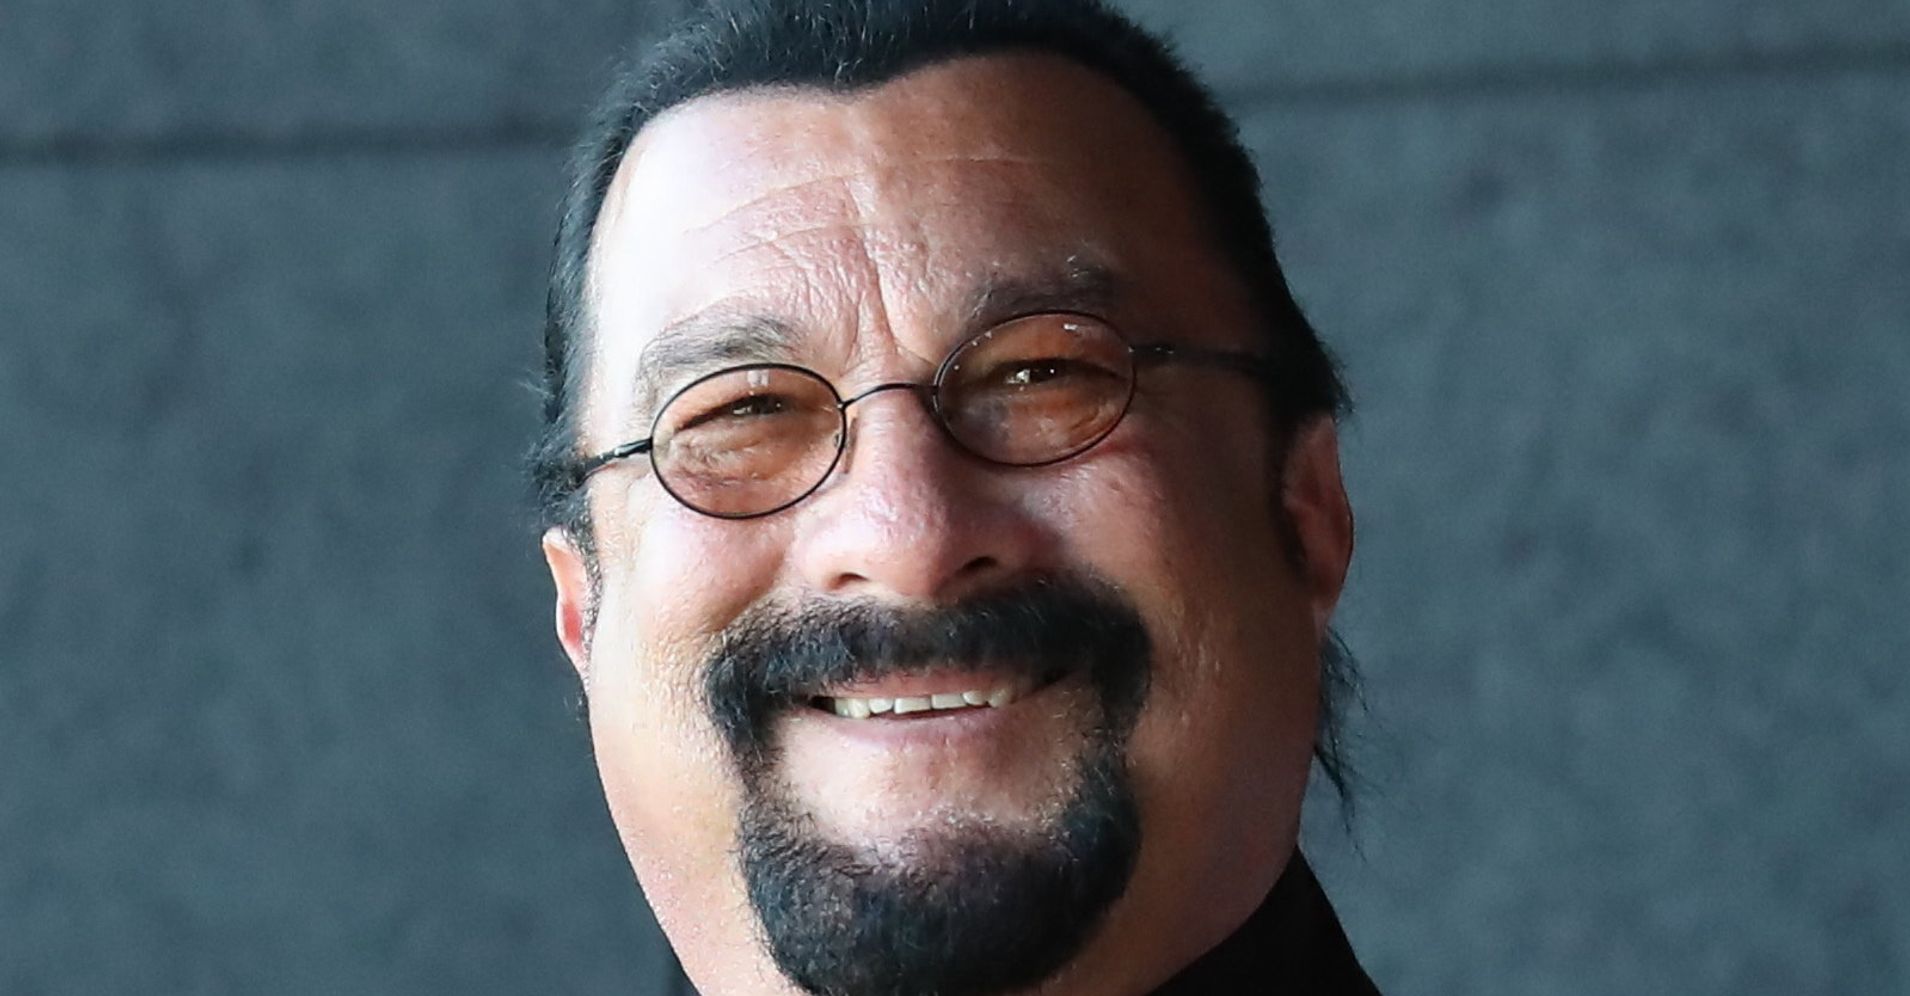 How much does Steven Seagal get paid?